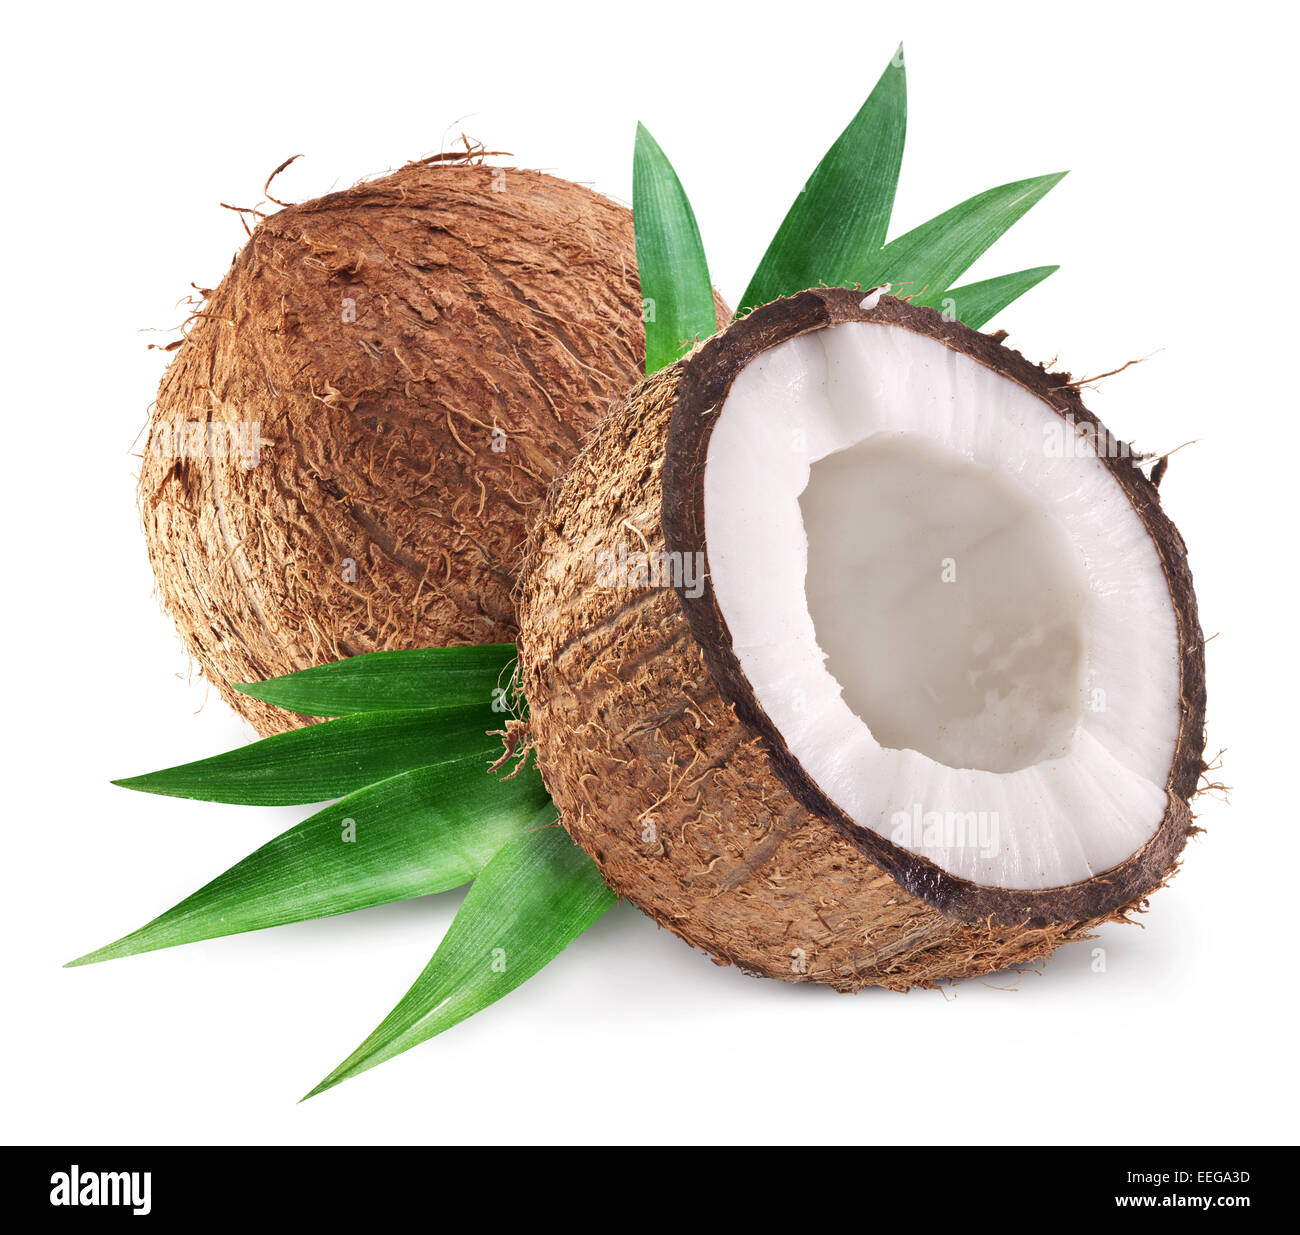 Coconuts and it's half with leaves. File contains clipping paths. Stock Photo